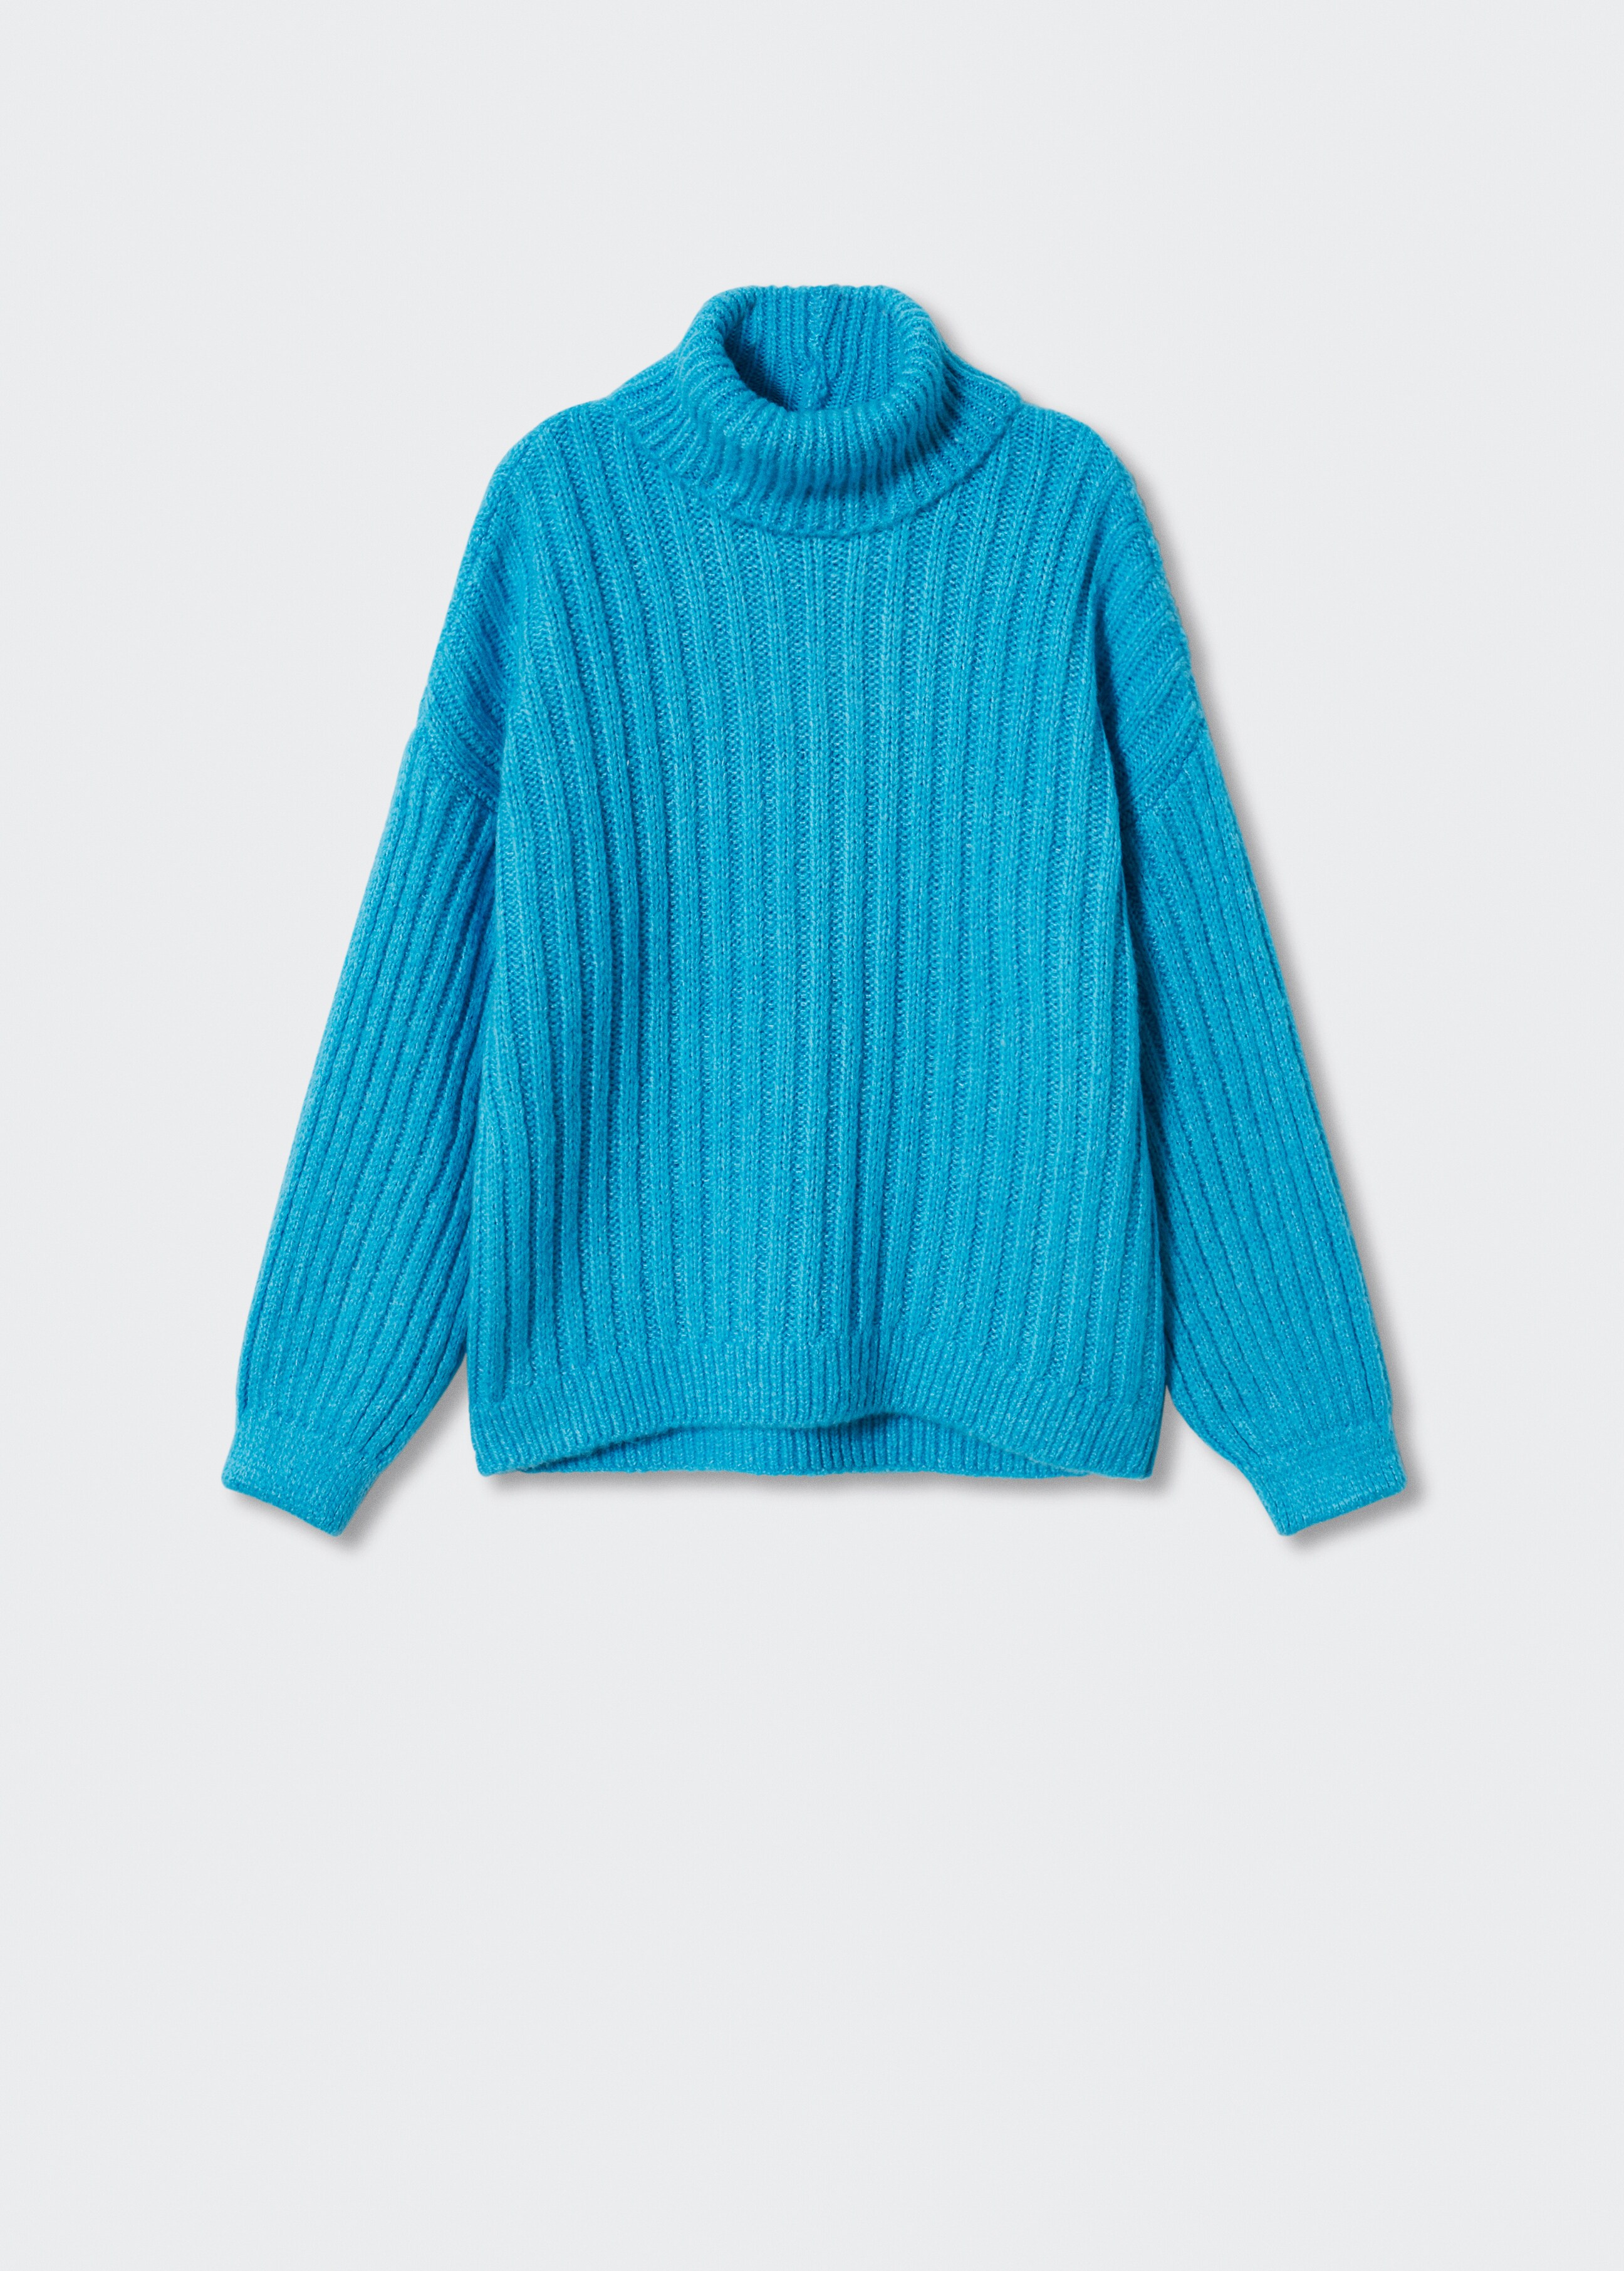 Turtle neck sweater - Article without model